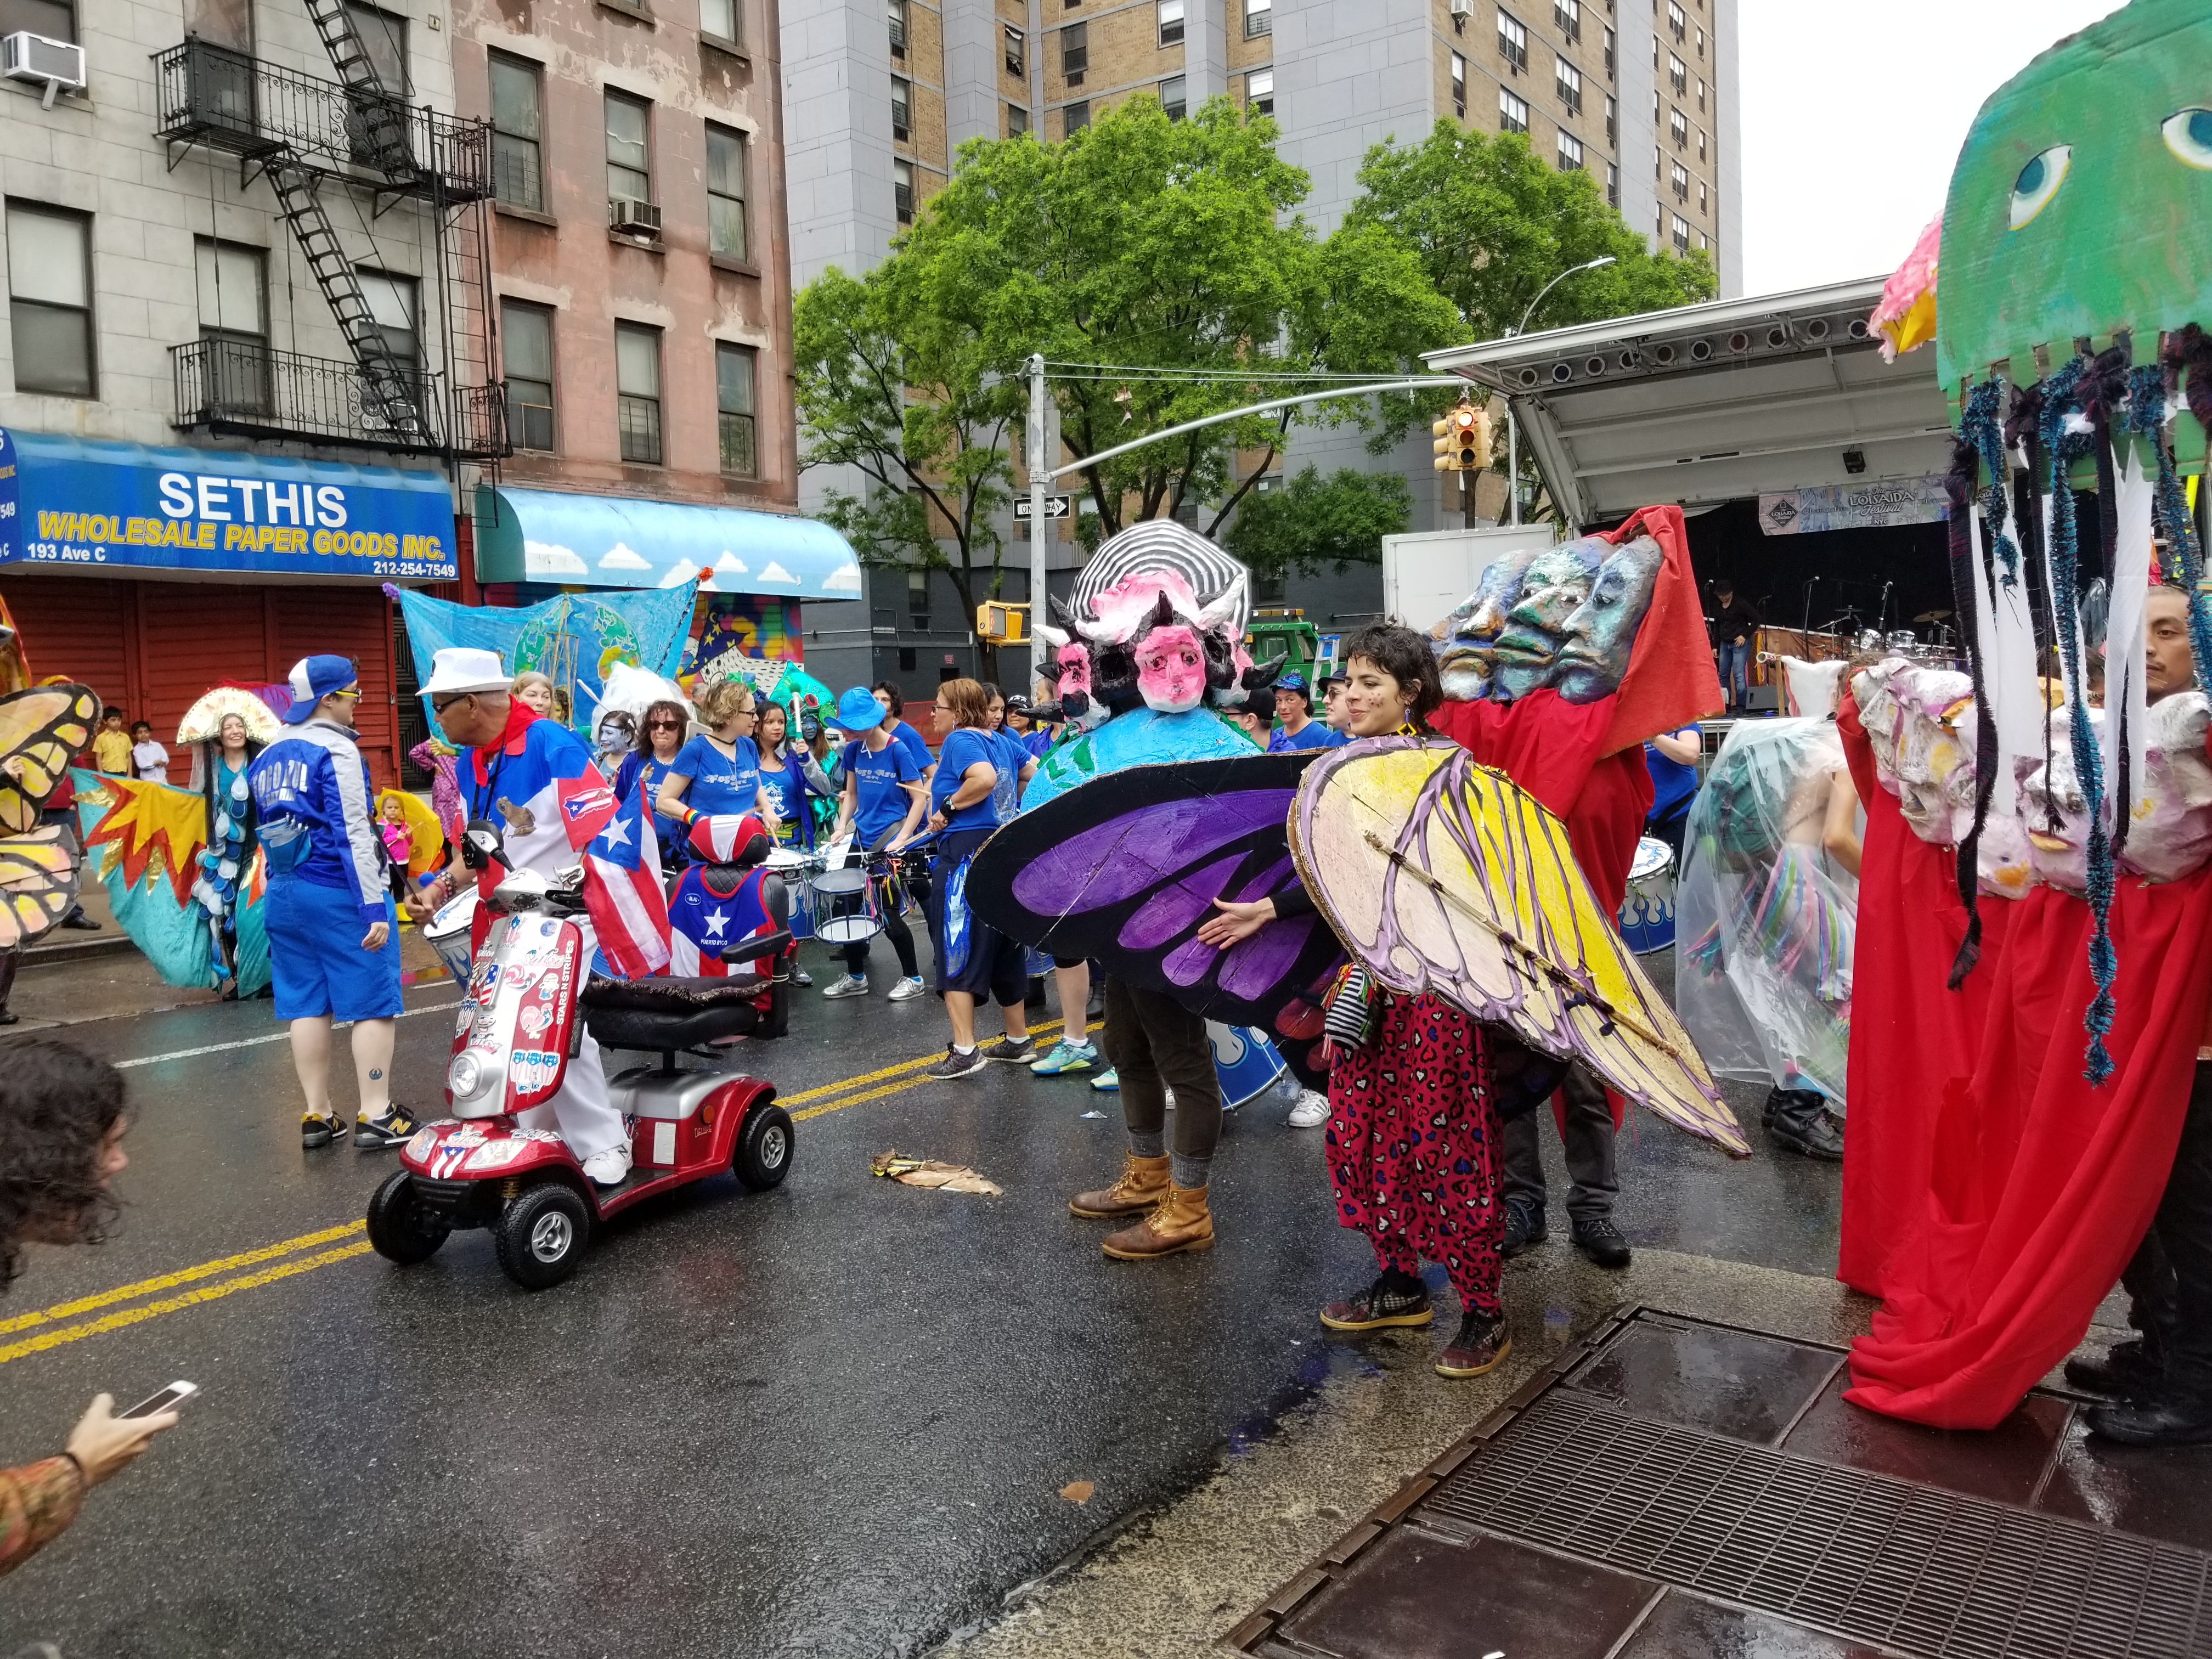 This is a photo of the parade at the Loisaida Festival in New York City. I took it in 2018.